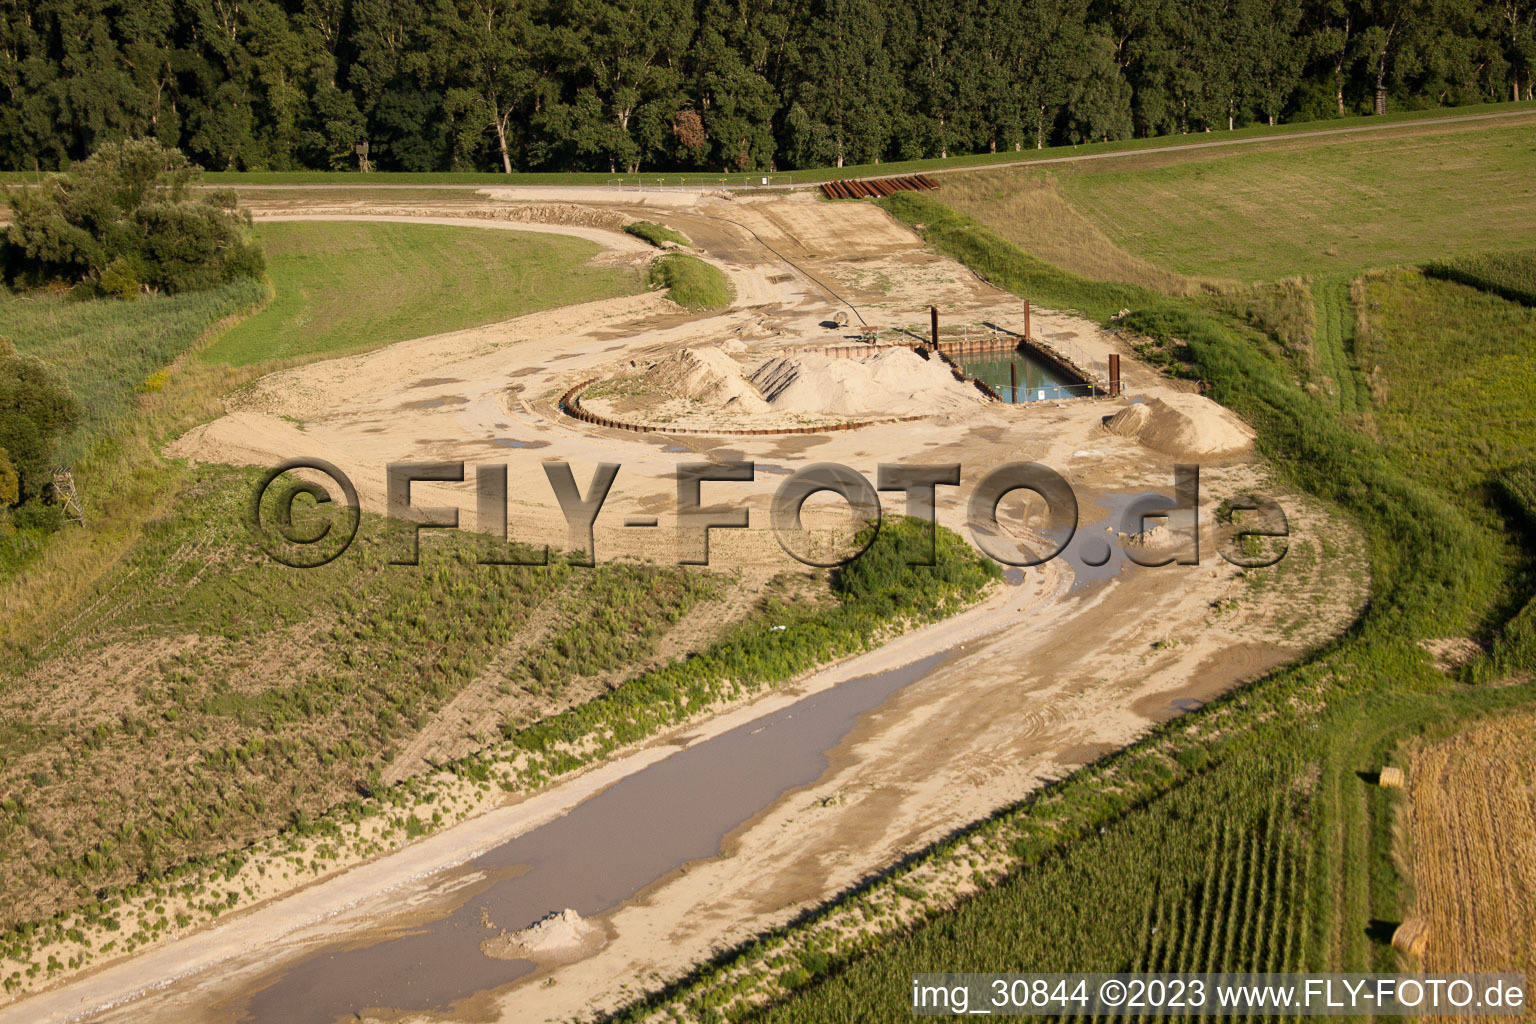 Polder construction in Neupotz in the state Rhineland-Palatinate, Germany seen from a drone